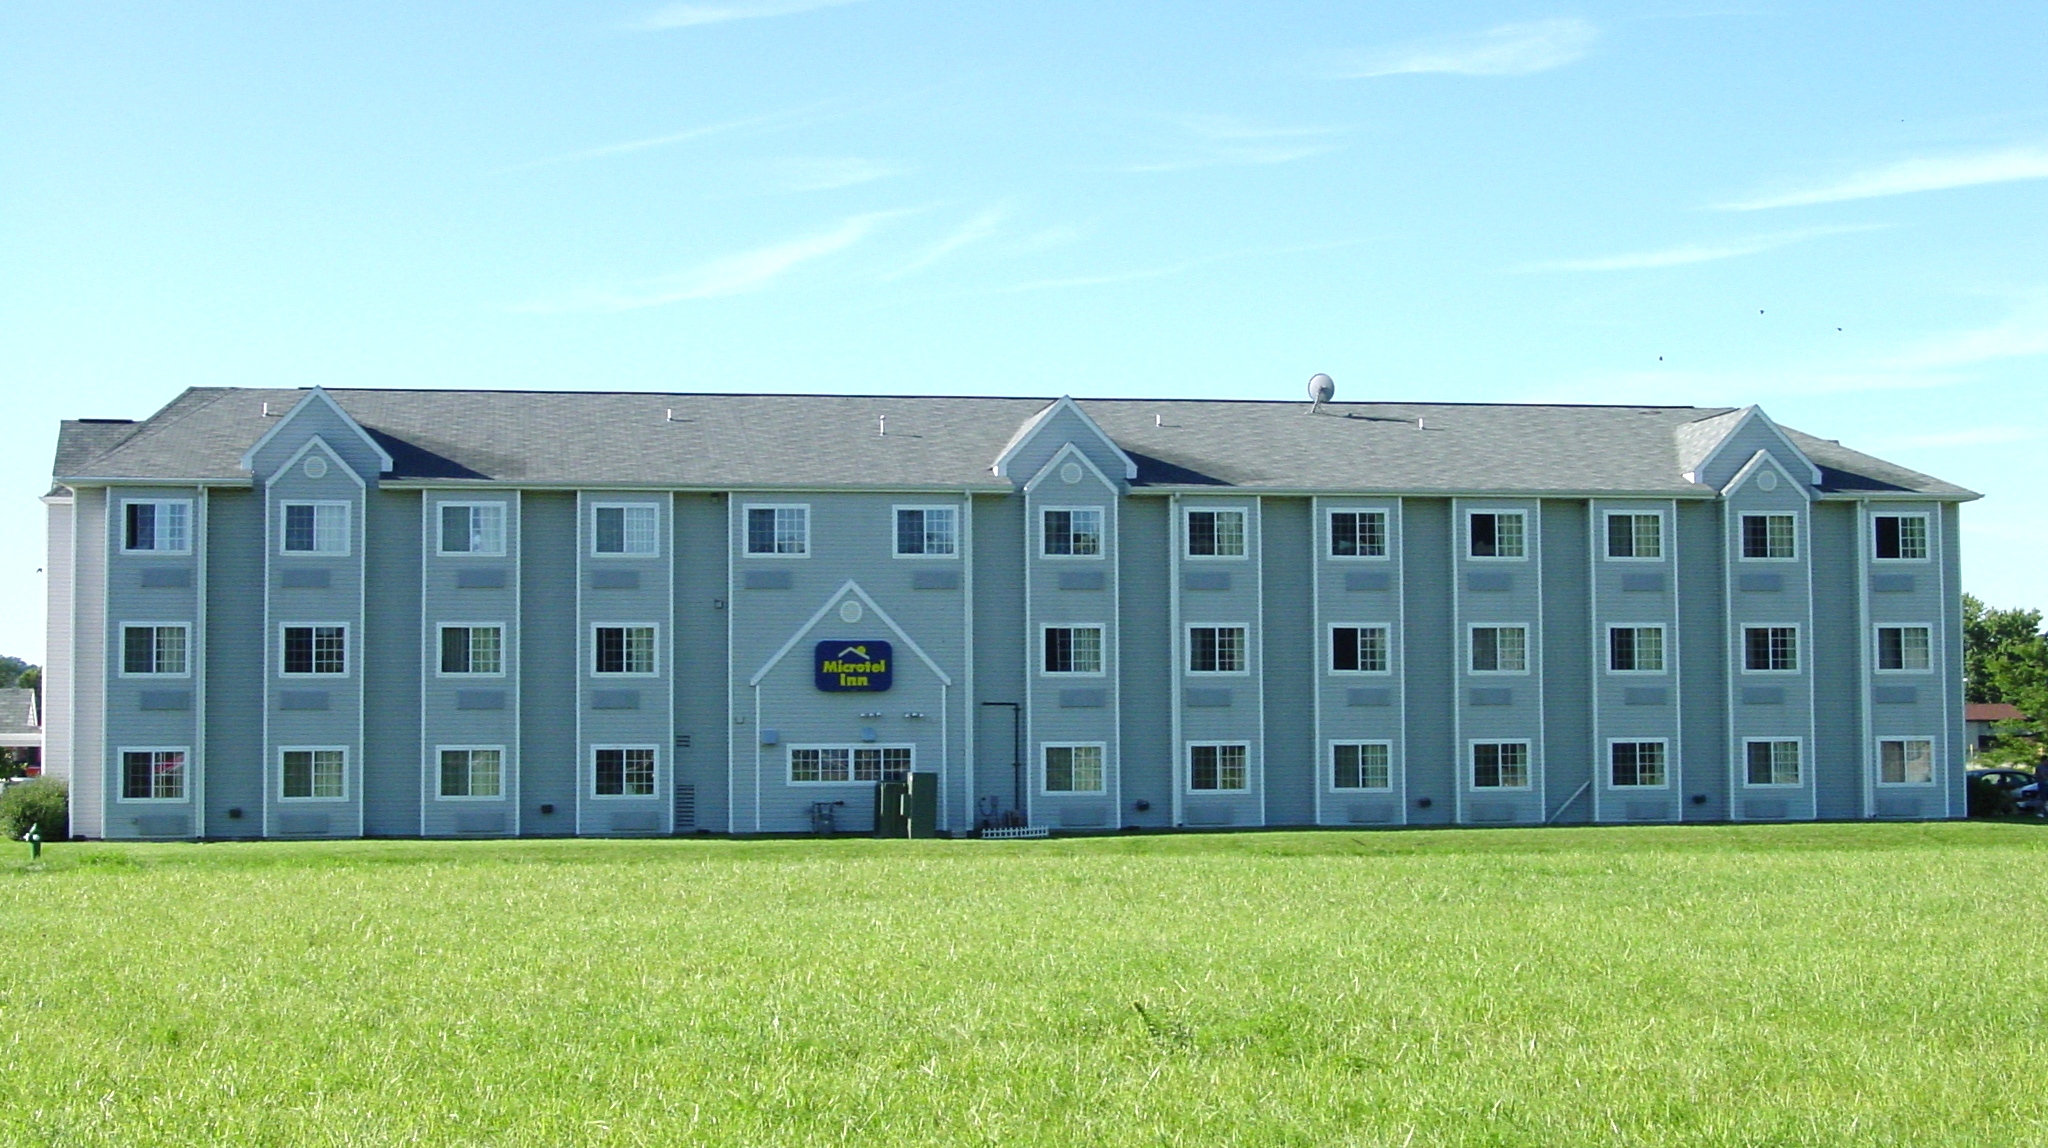 Microtel Inn & Suites by Wyndam - Greater Mankato